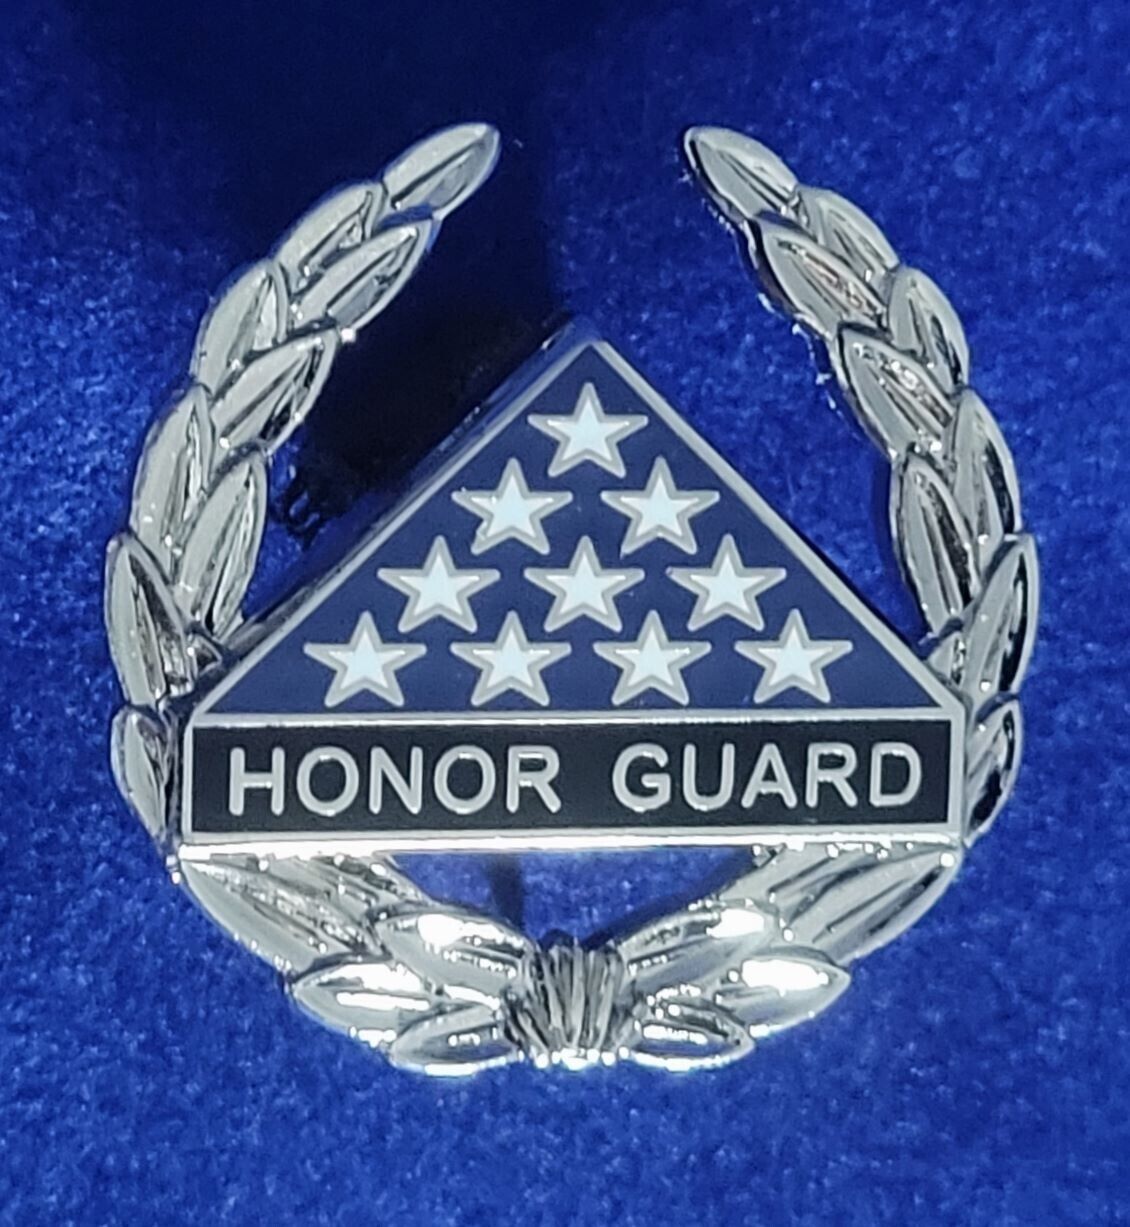 LEAF HONOR GUARD PIN, Item #12:  Silver (nickel) color plated